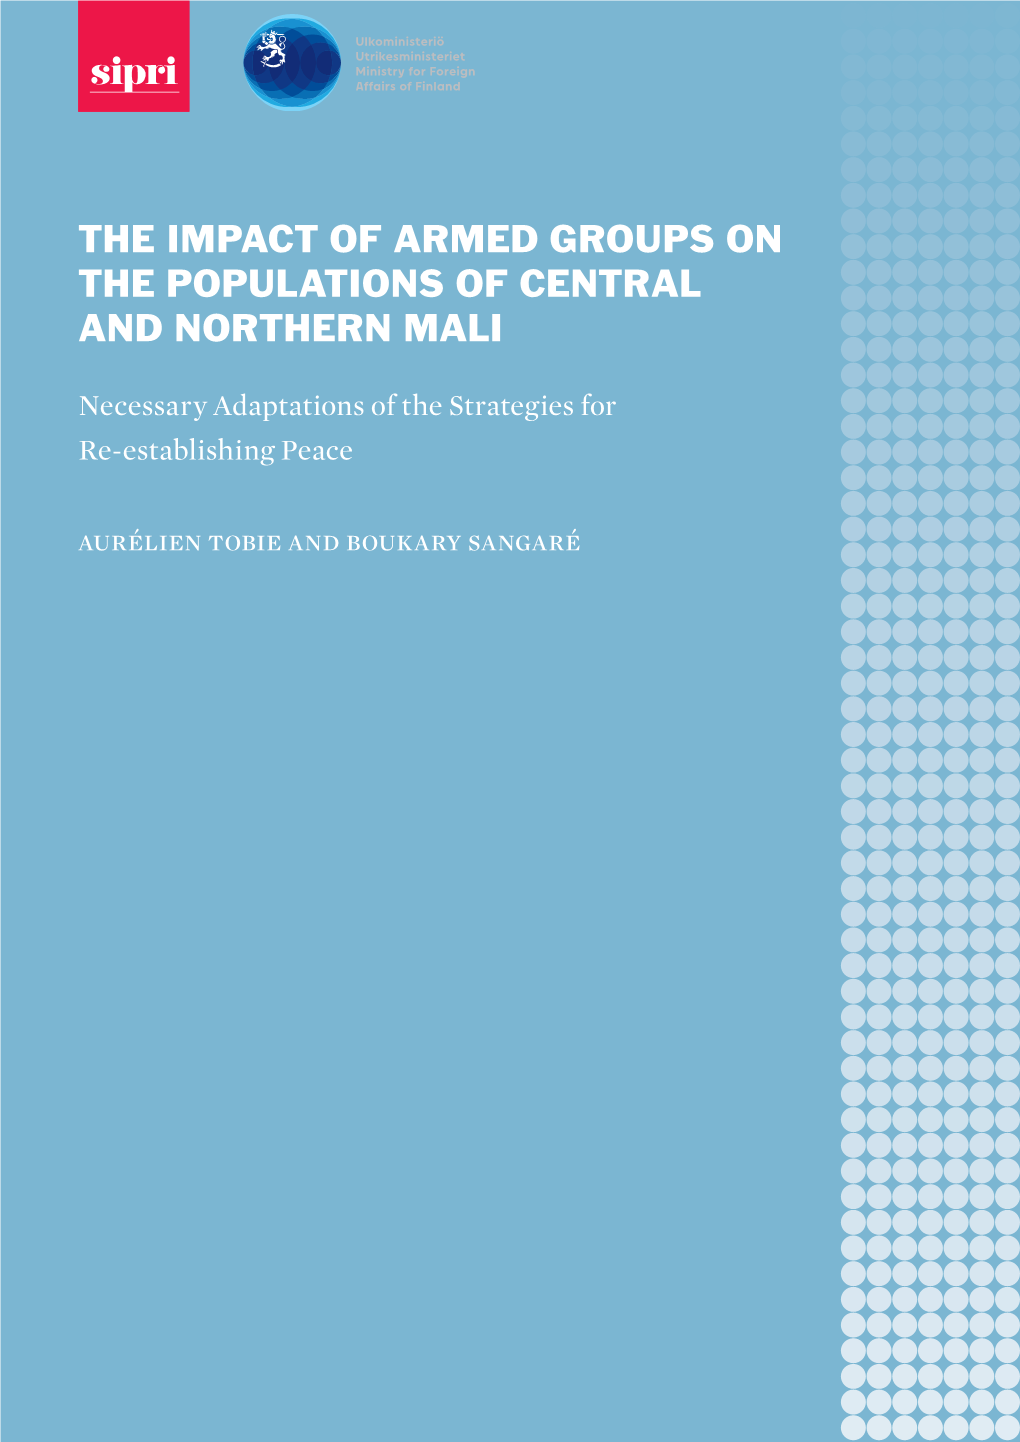 The Impact of Armed Groups on the Populations of Central and Northern Mali